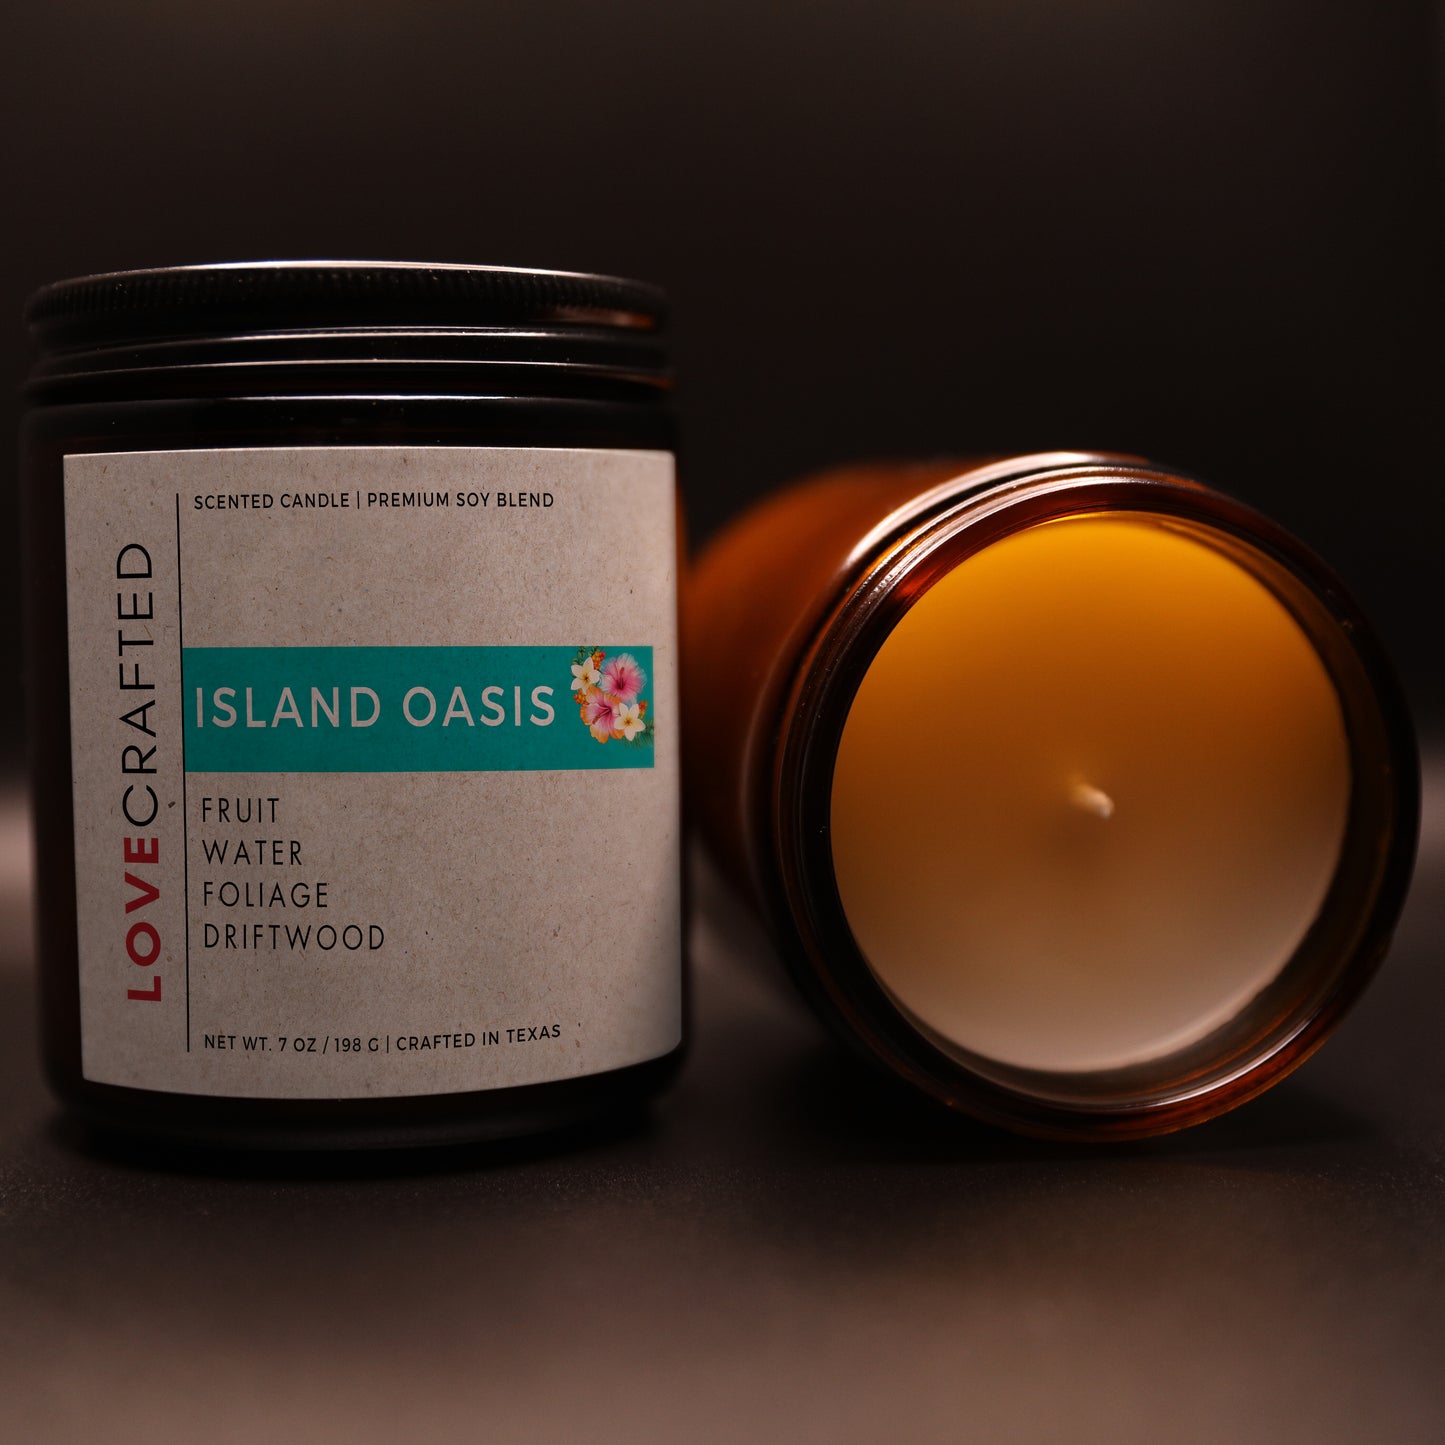 Island Oasis, a Fruity Citrus Lovecrafted Candle